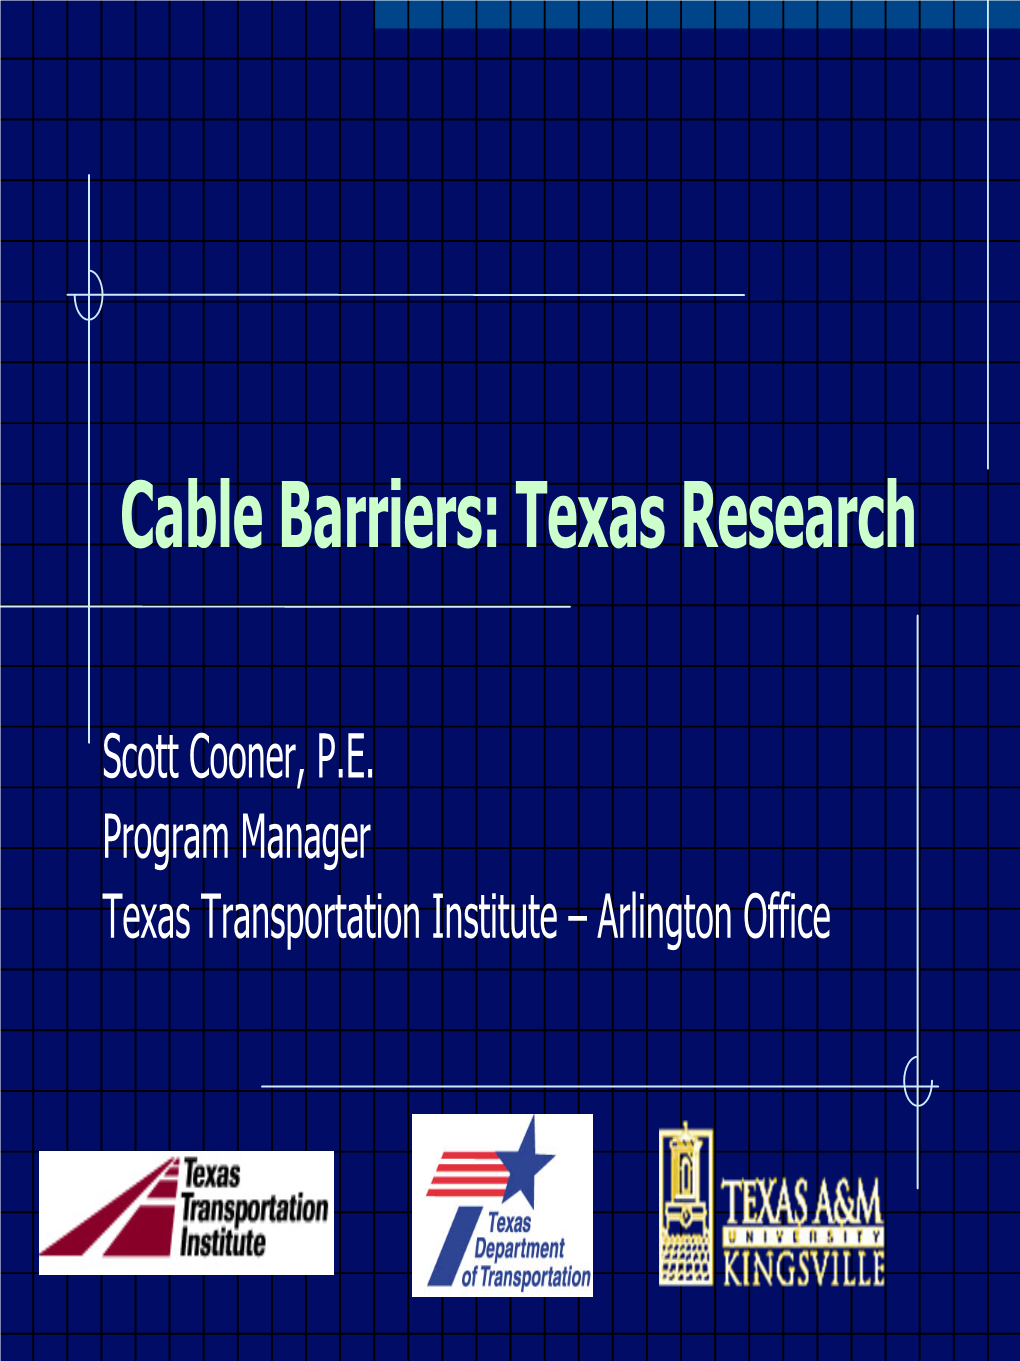 Cable Barriers: Texas Research